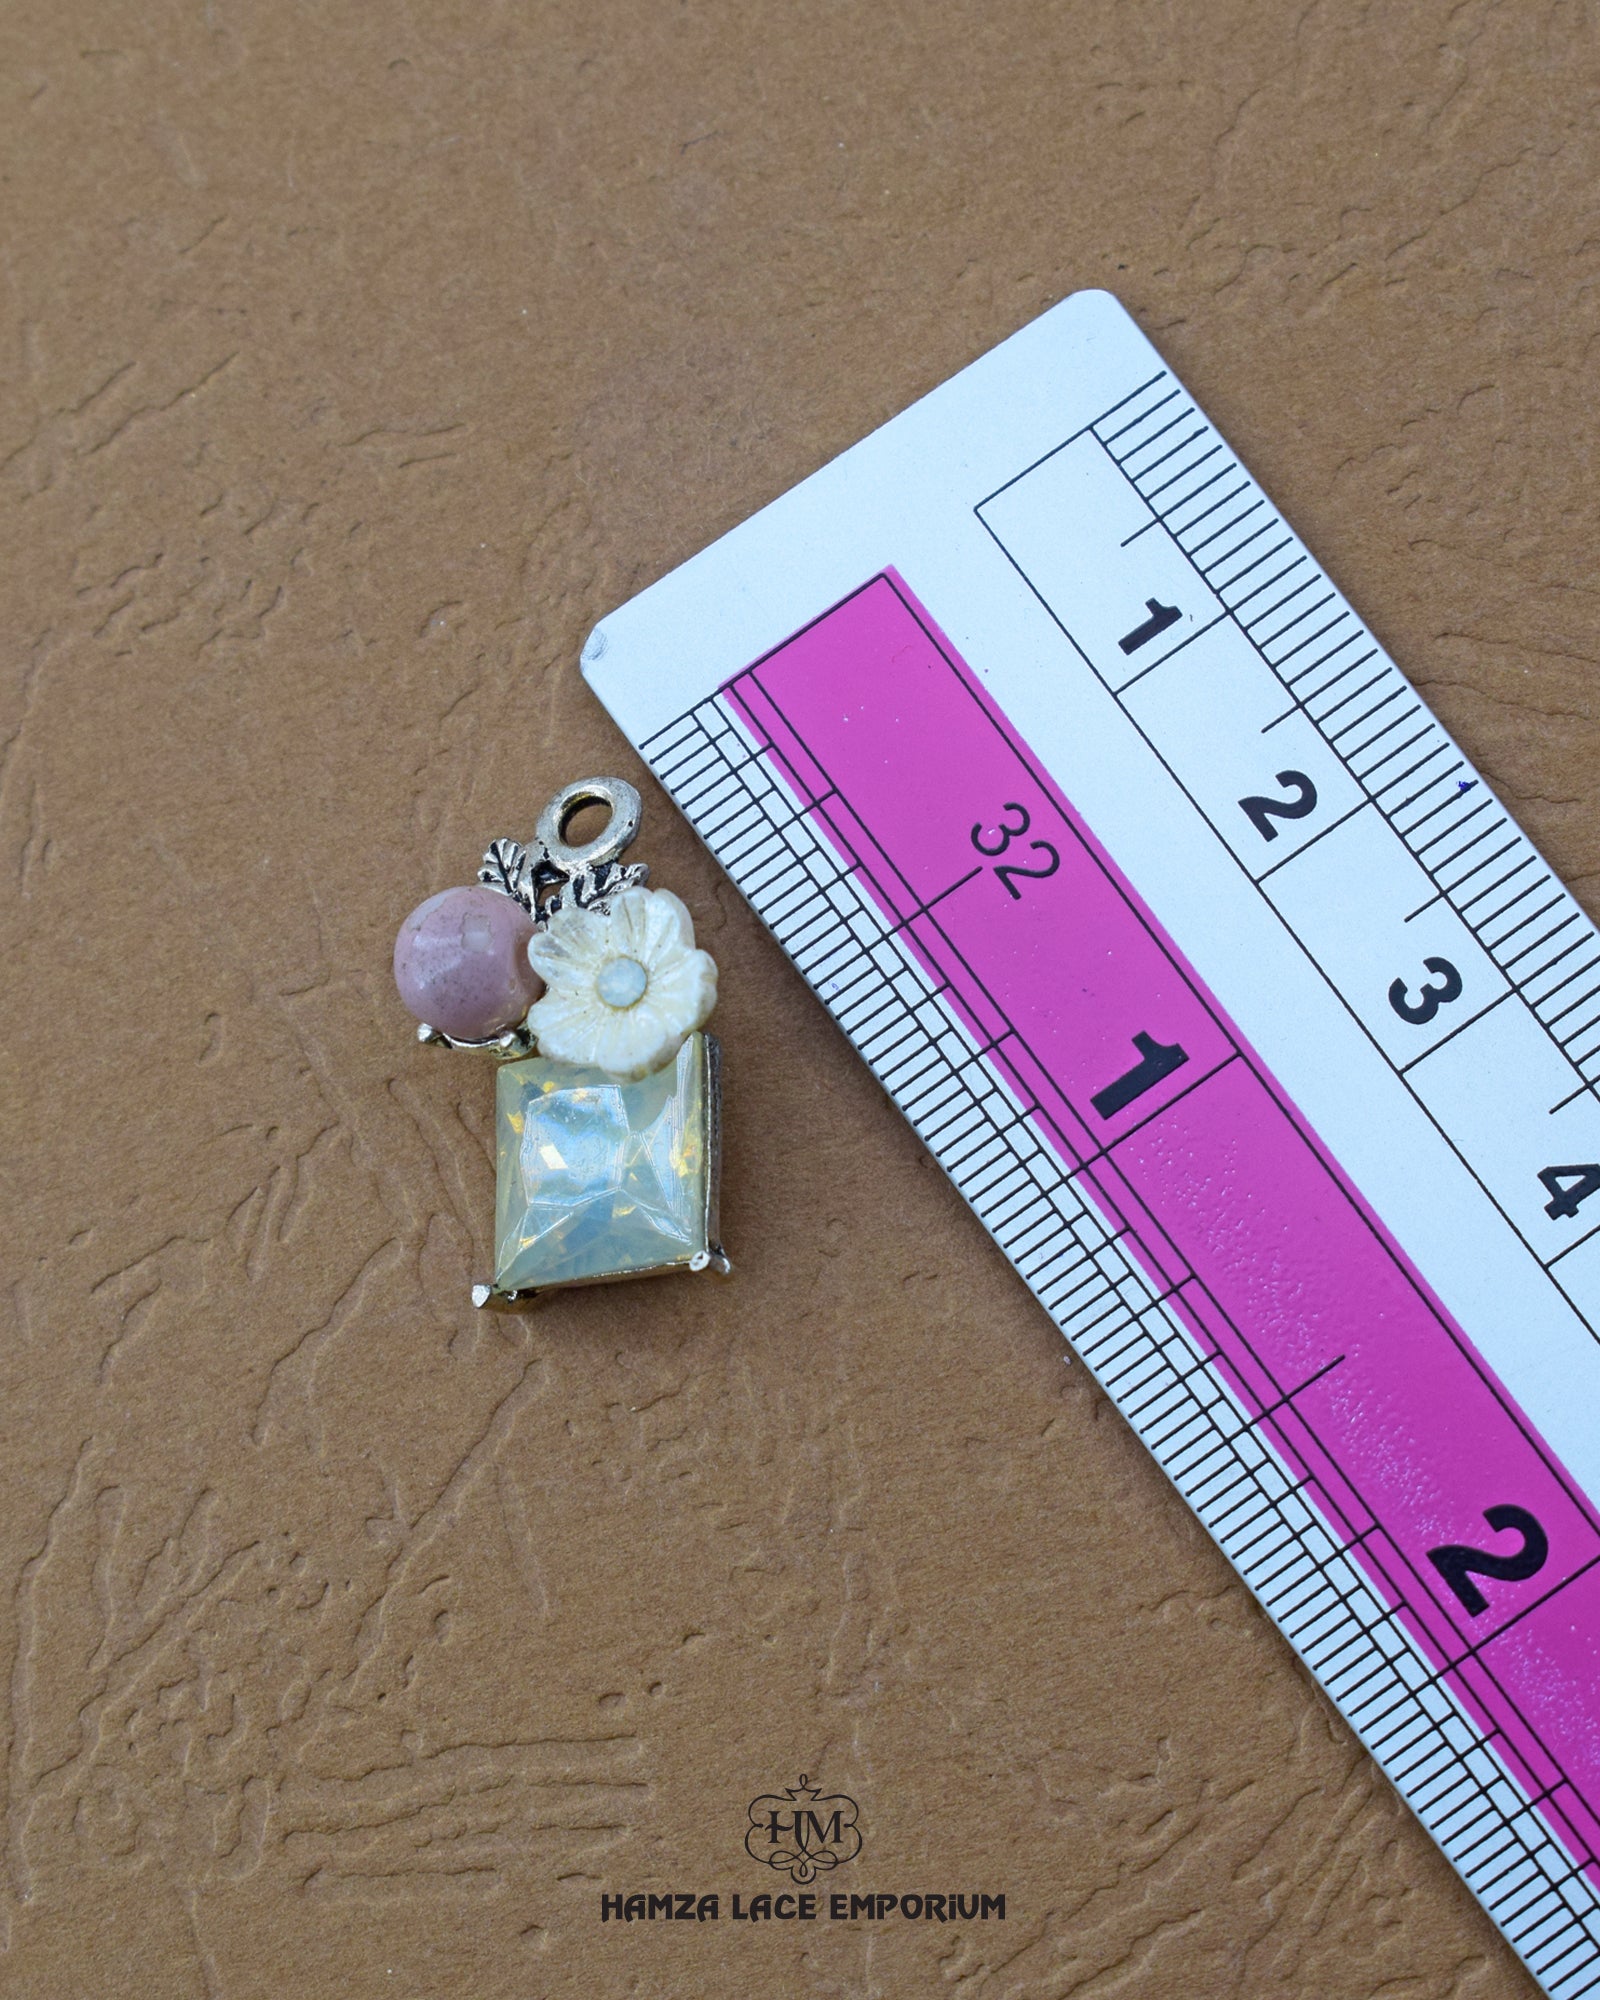 Elegant 'Hanging Button 21FBC' for Clothing (Size shown with ruler)